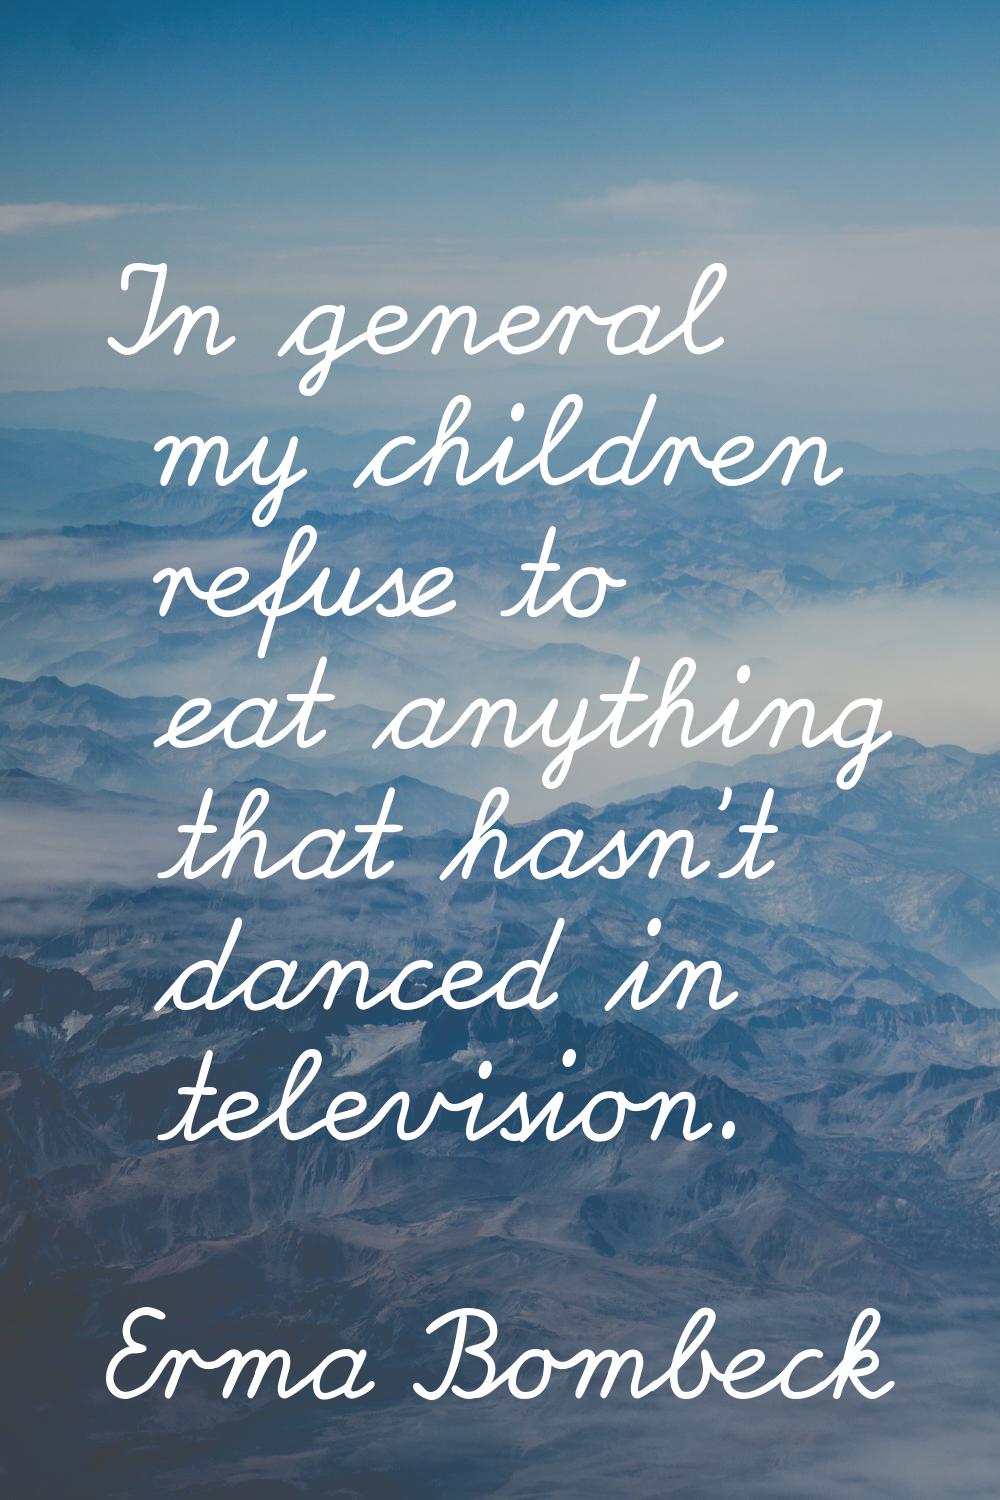 In general my children refuse to eat anything that hasn't danced in television.